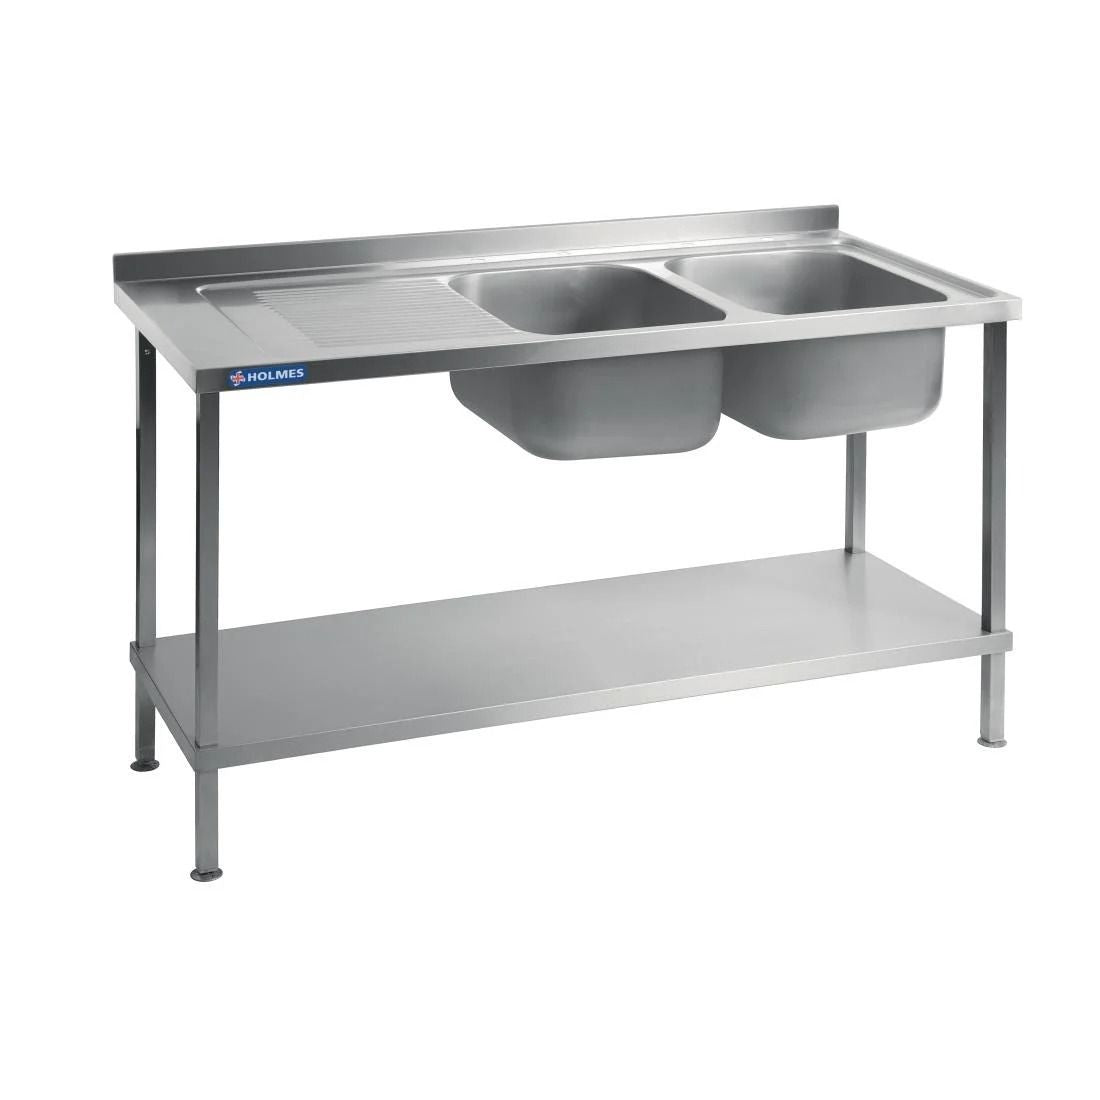 Holmes Fully Assembled Stainless Steel Sink Left Hand Drainer 1800mm - DR395